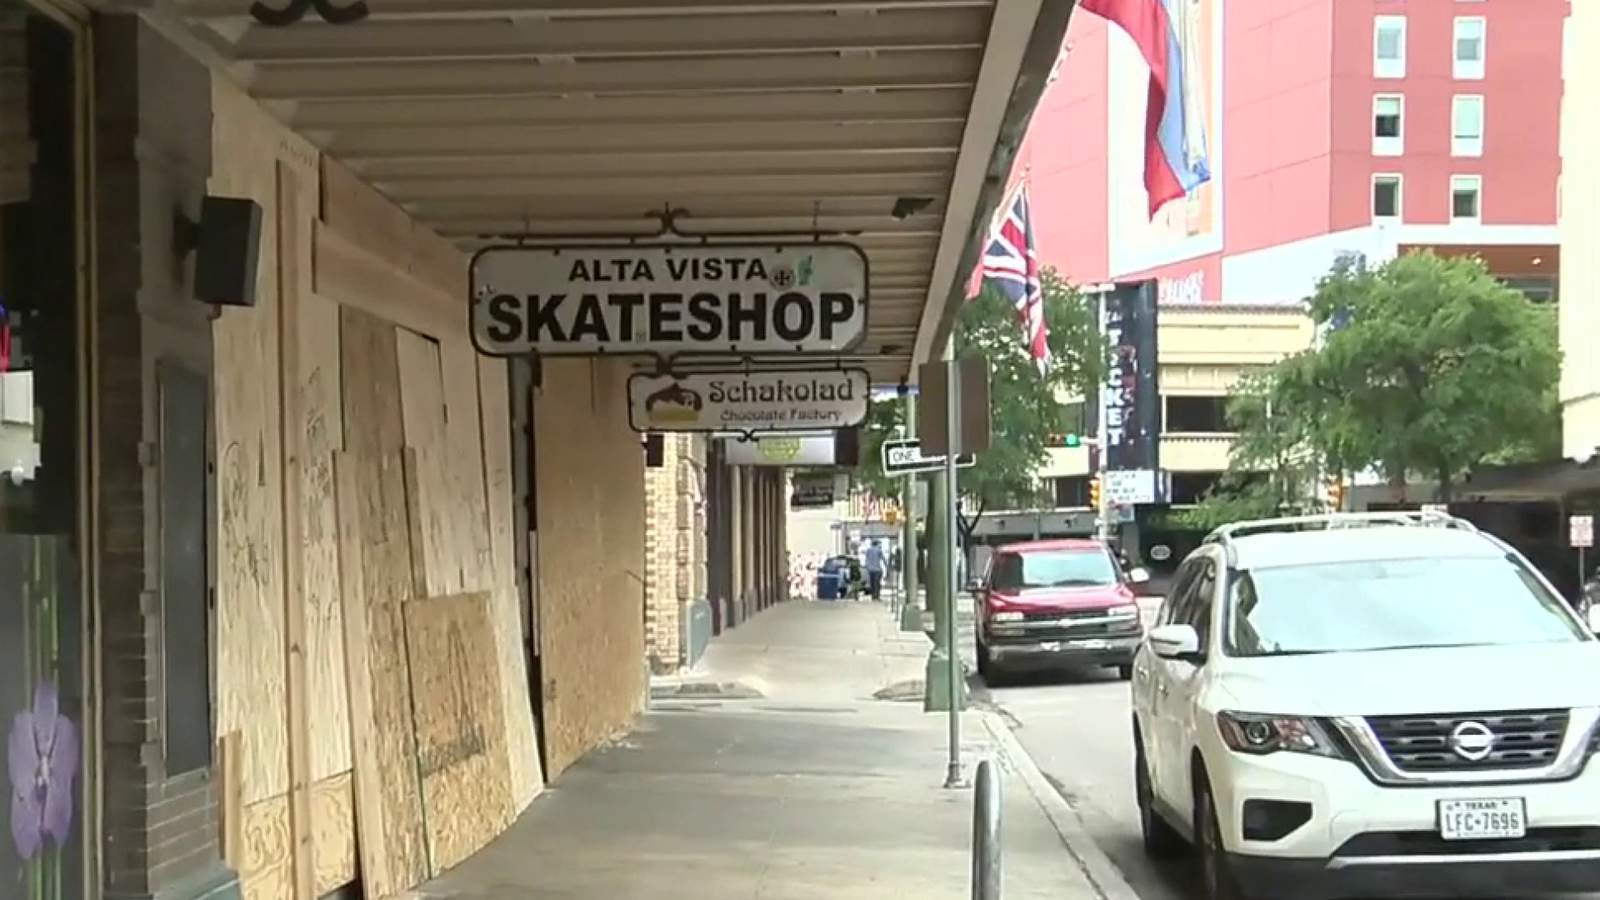 WATCH: Centro San Antonio, downtown businesses thank those who helped clean up after Saturdays violence